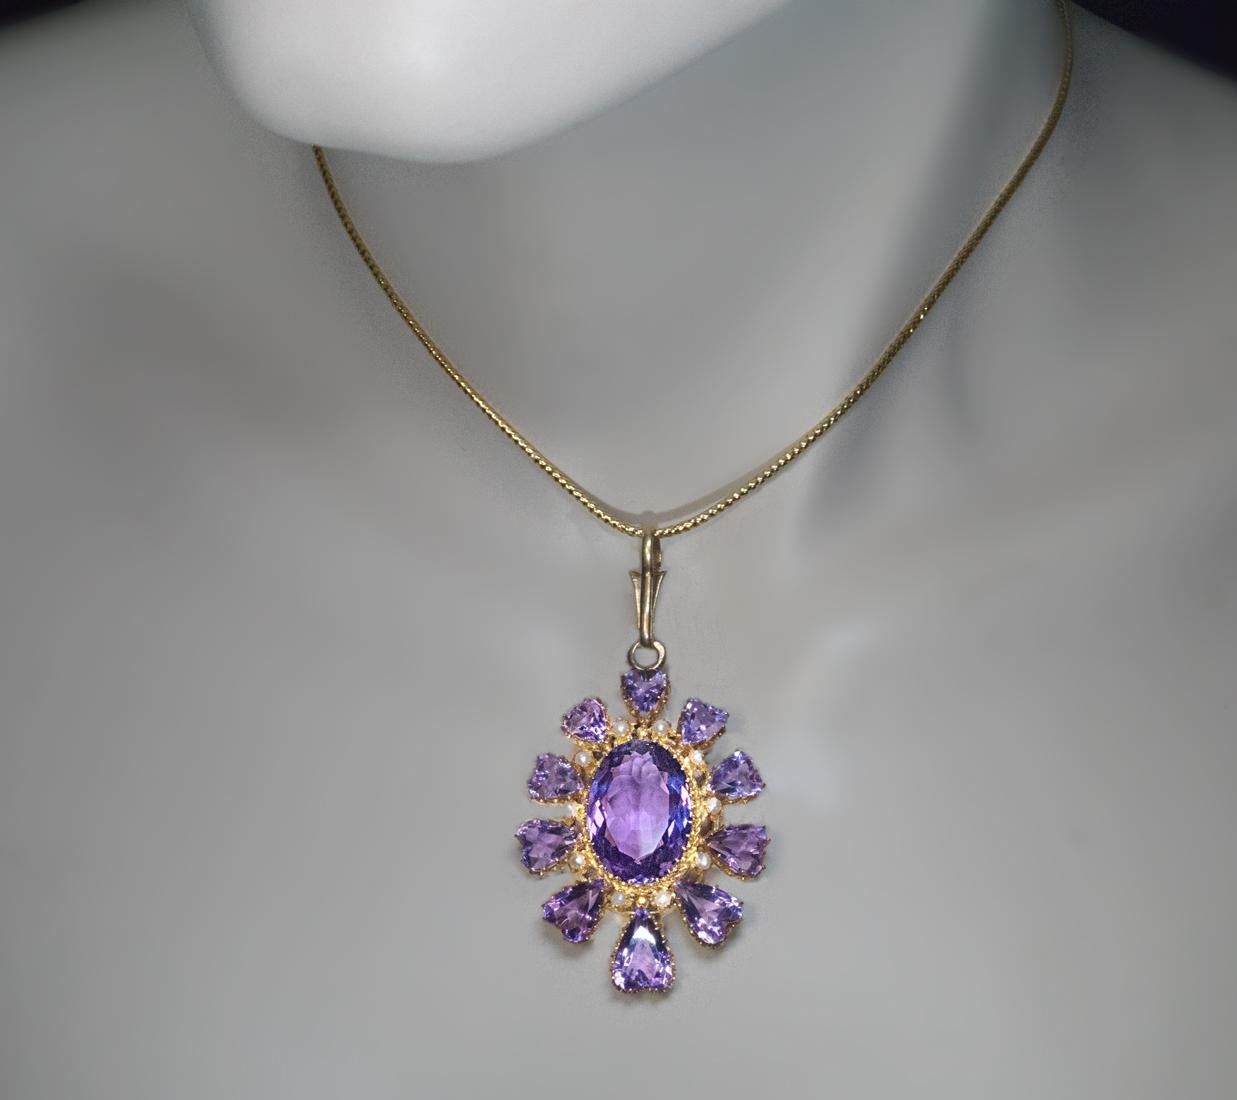 Circa 1870s-1880s

This vibrant antique 14K gold pendant features sparkling lavender purple amethysts. It is centered with an oval amethyst, accented by small half pearls, and  surrounded by ten heart-shaped amethysts which graduate vertically in